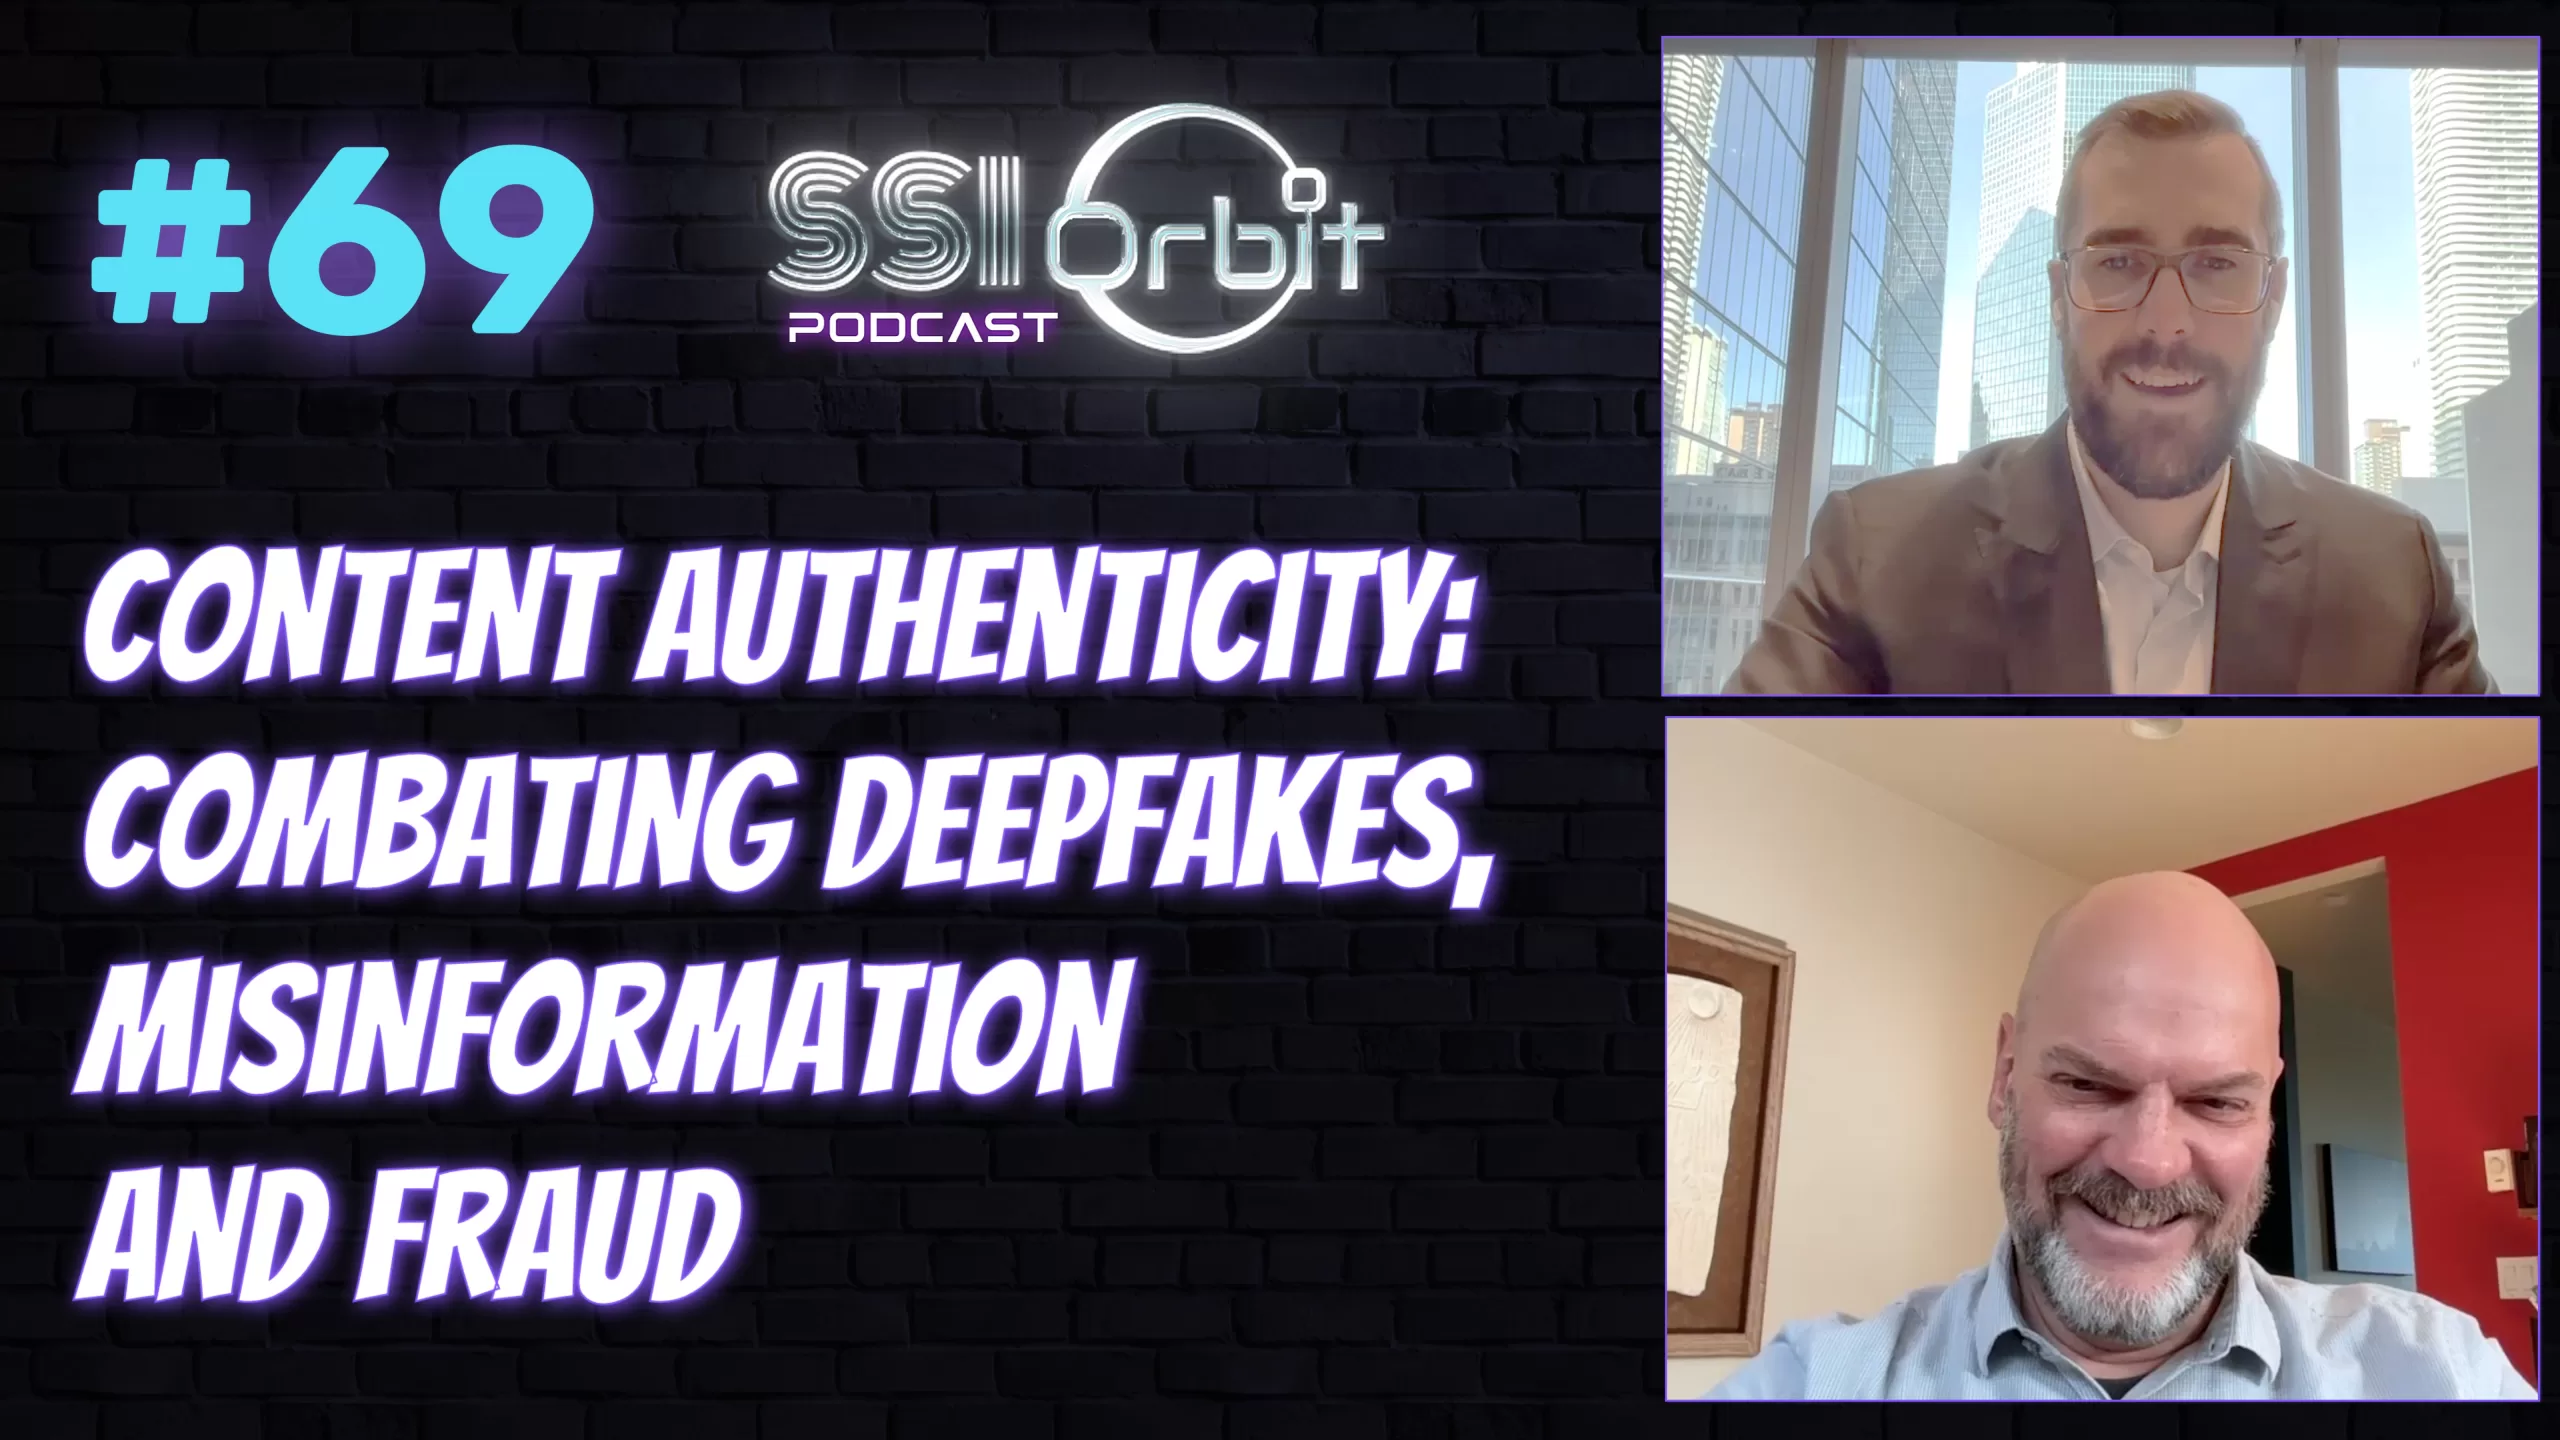 Content Authenticity: Combating Deepfakes, Misinformation and Fraud (with Eric Scouten)